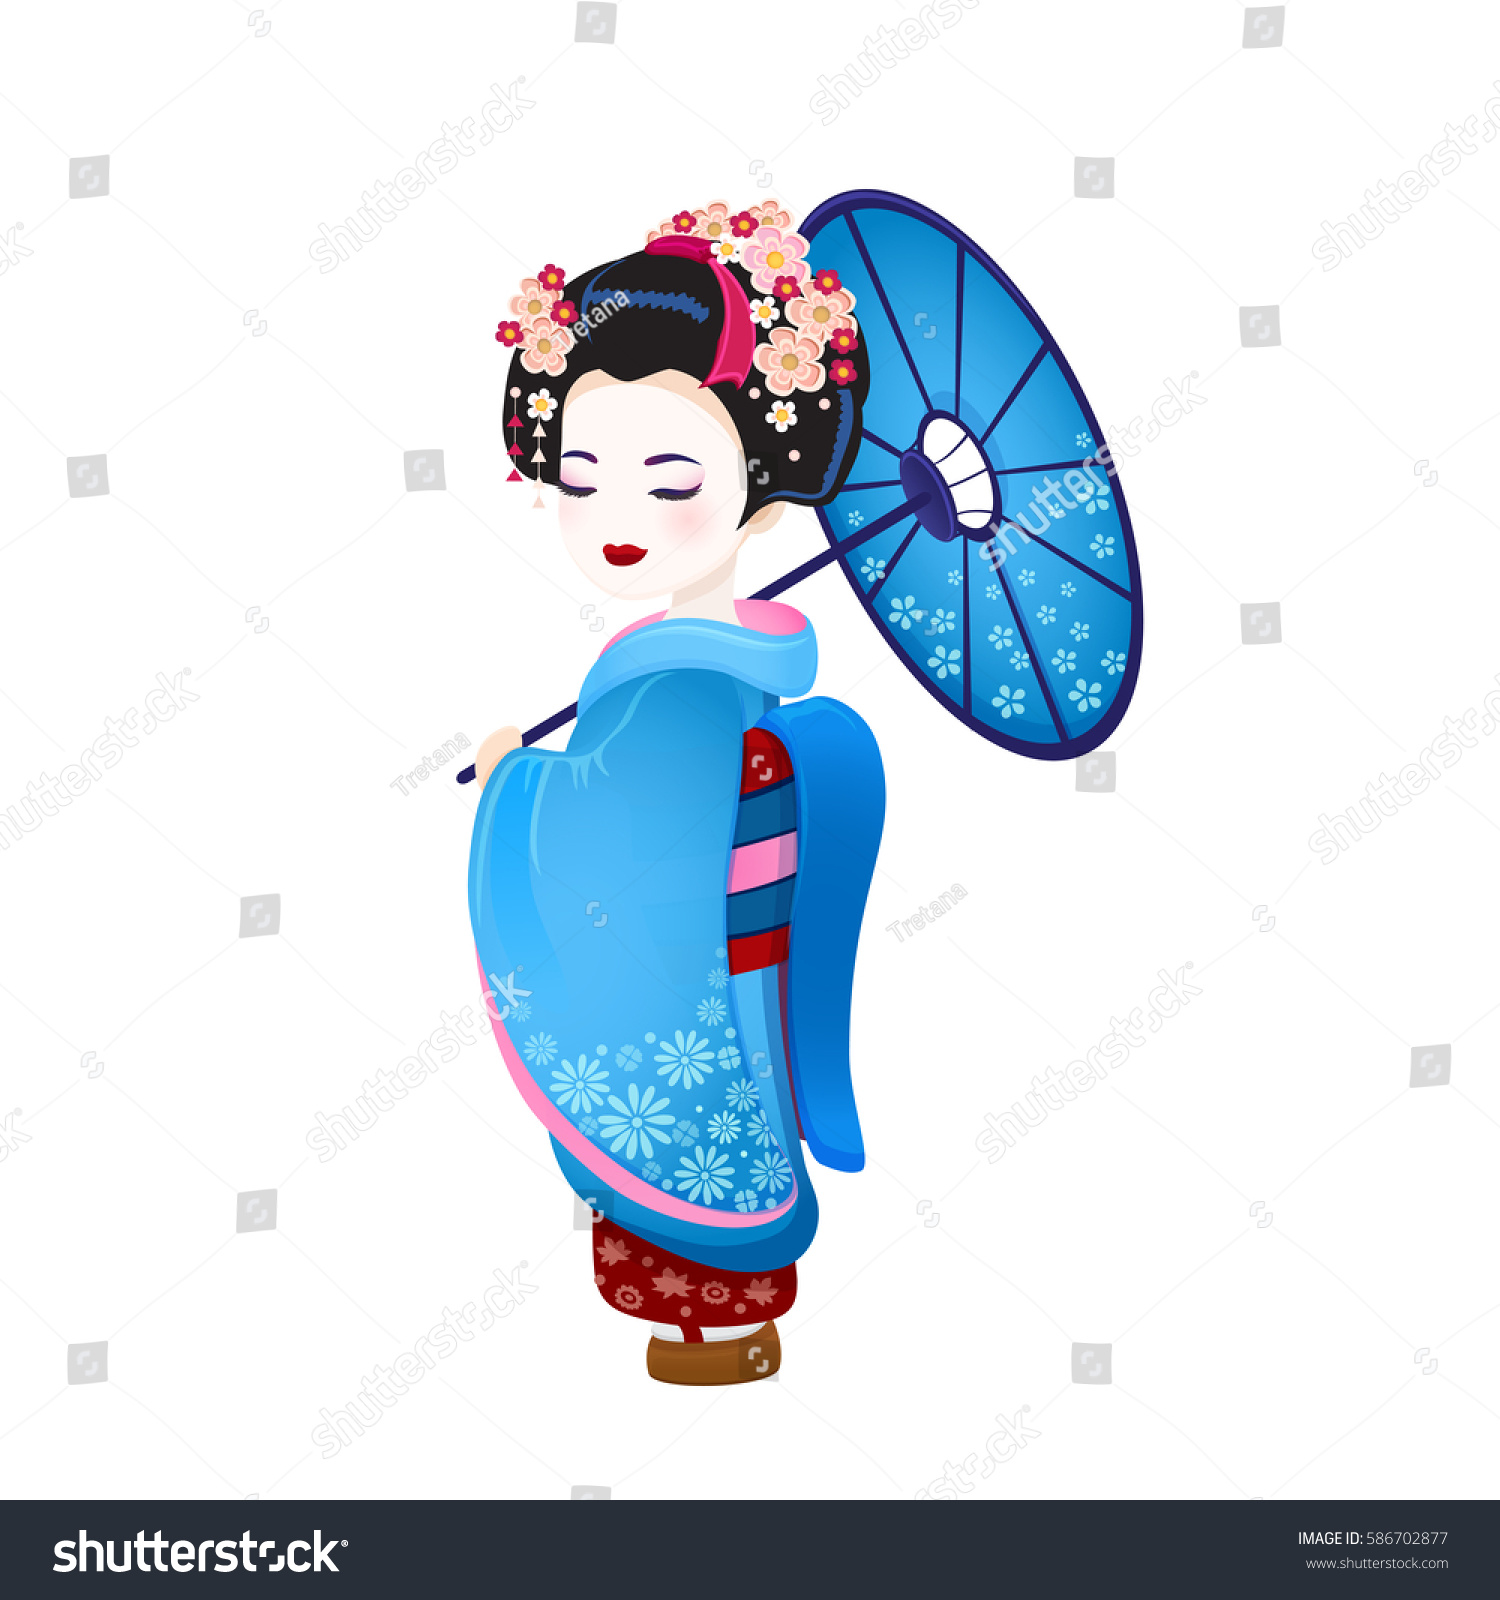 SVG of Beautifull japanese girl in kimono Young Geisha with blue umbrella hanami sakura blossom old kimono makeup maiko hair style shy, Japanese with eyes closed at the festival vector icon isolated on white svg